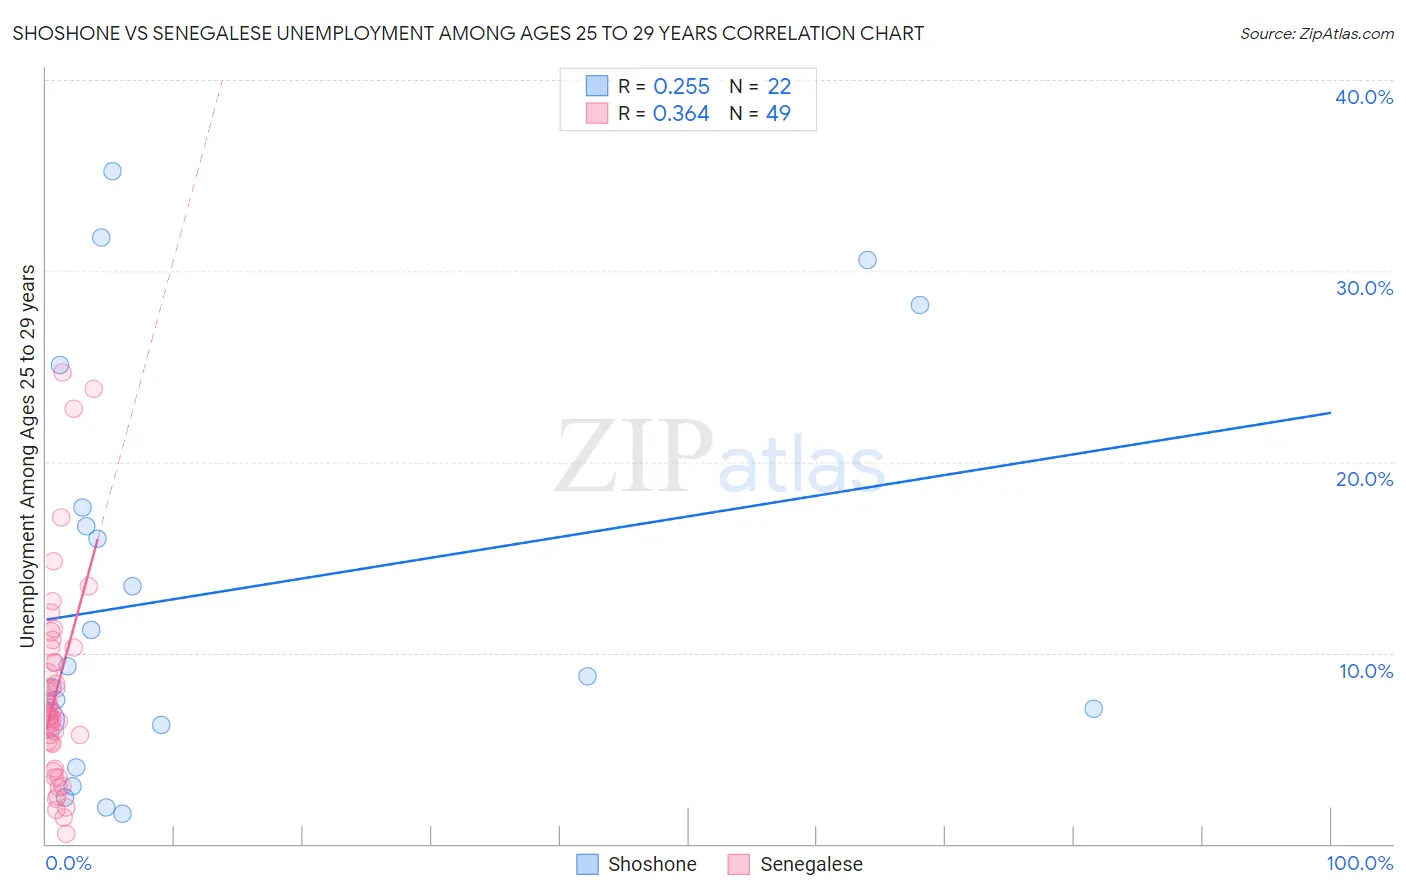 Shoshone vs Senegalese Unemployment Among Ages 25 to 29 years